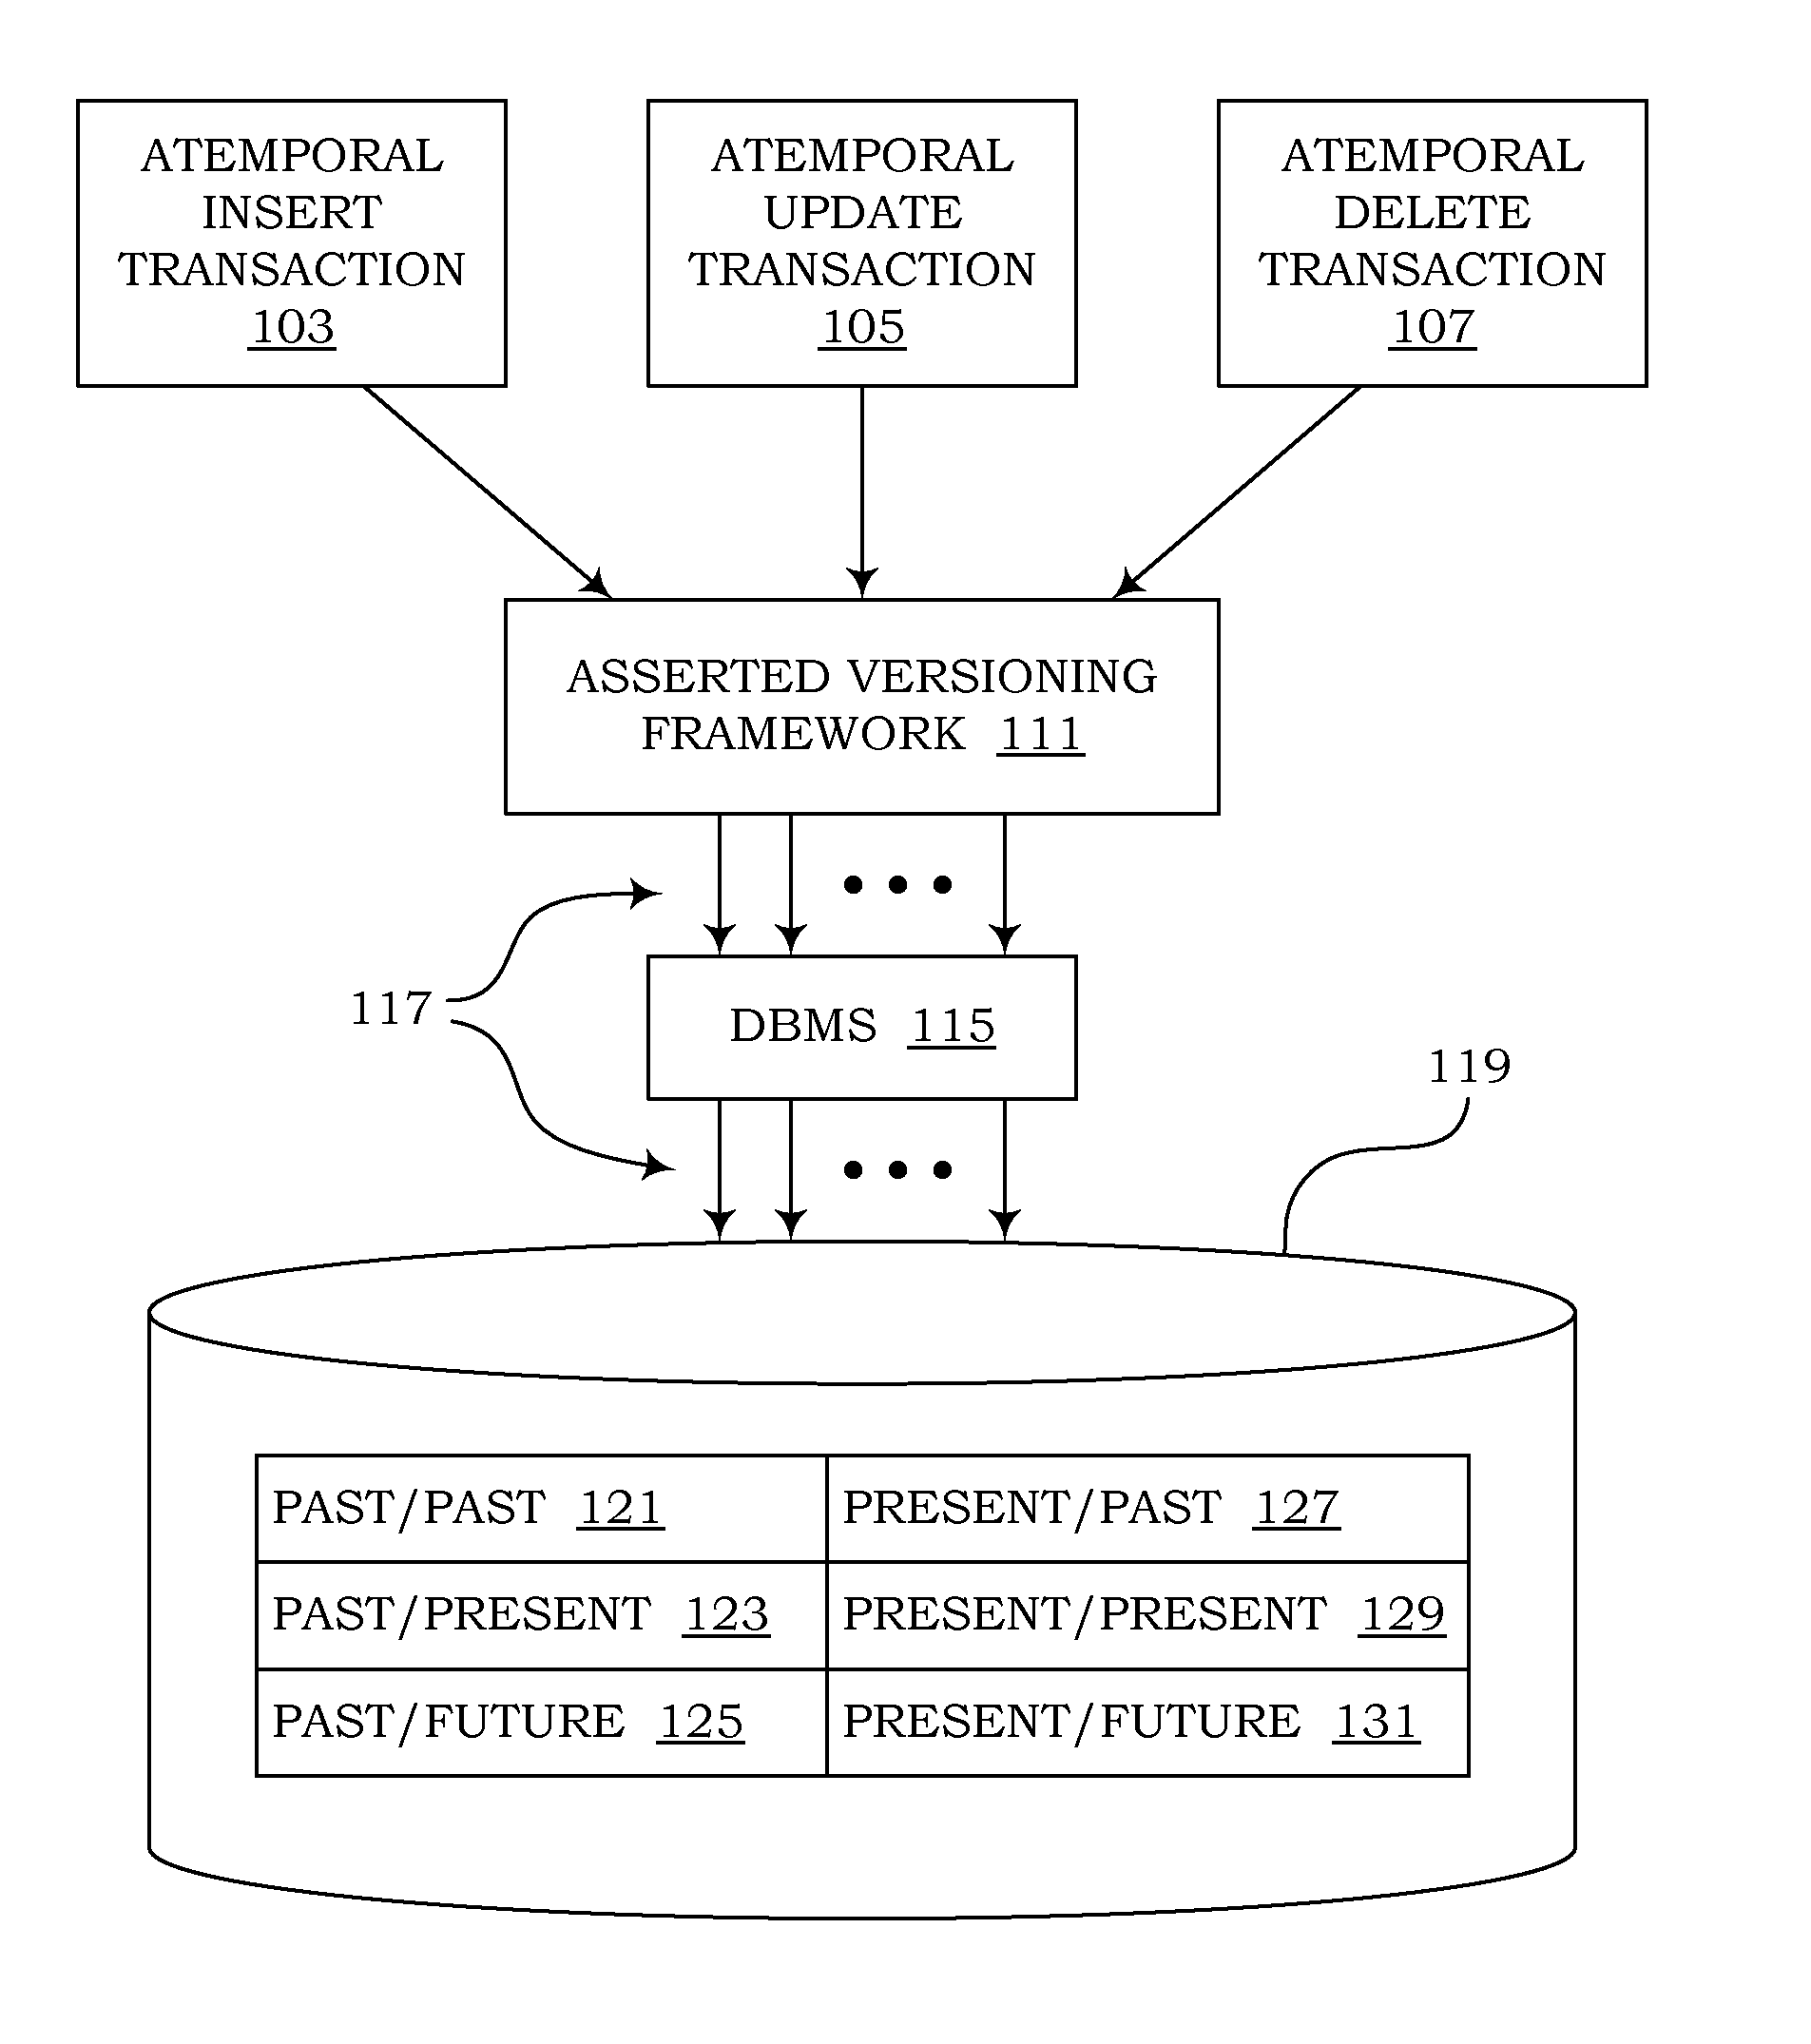 Management of temporal data by means of a canonical schema